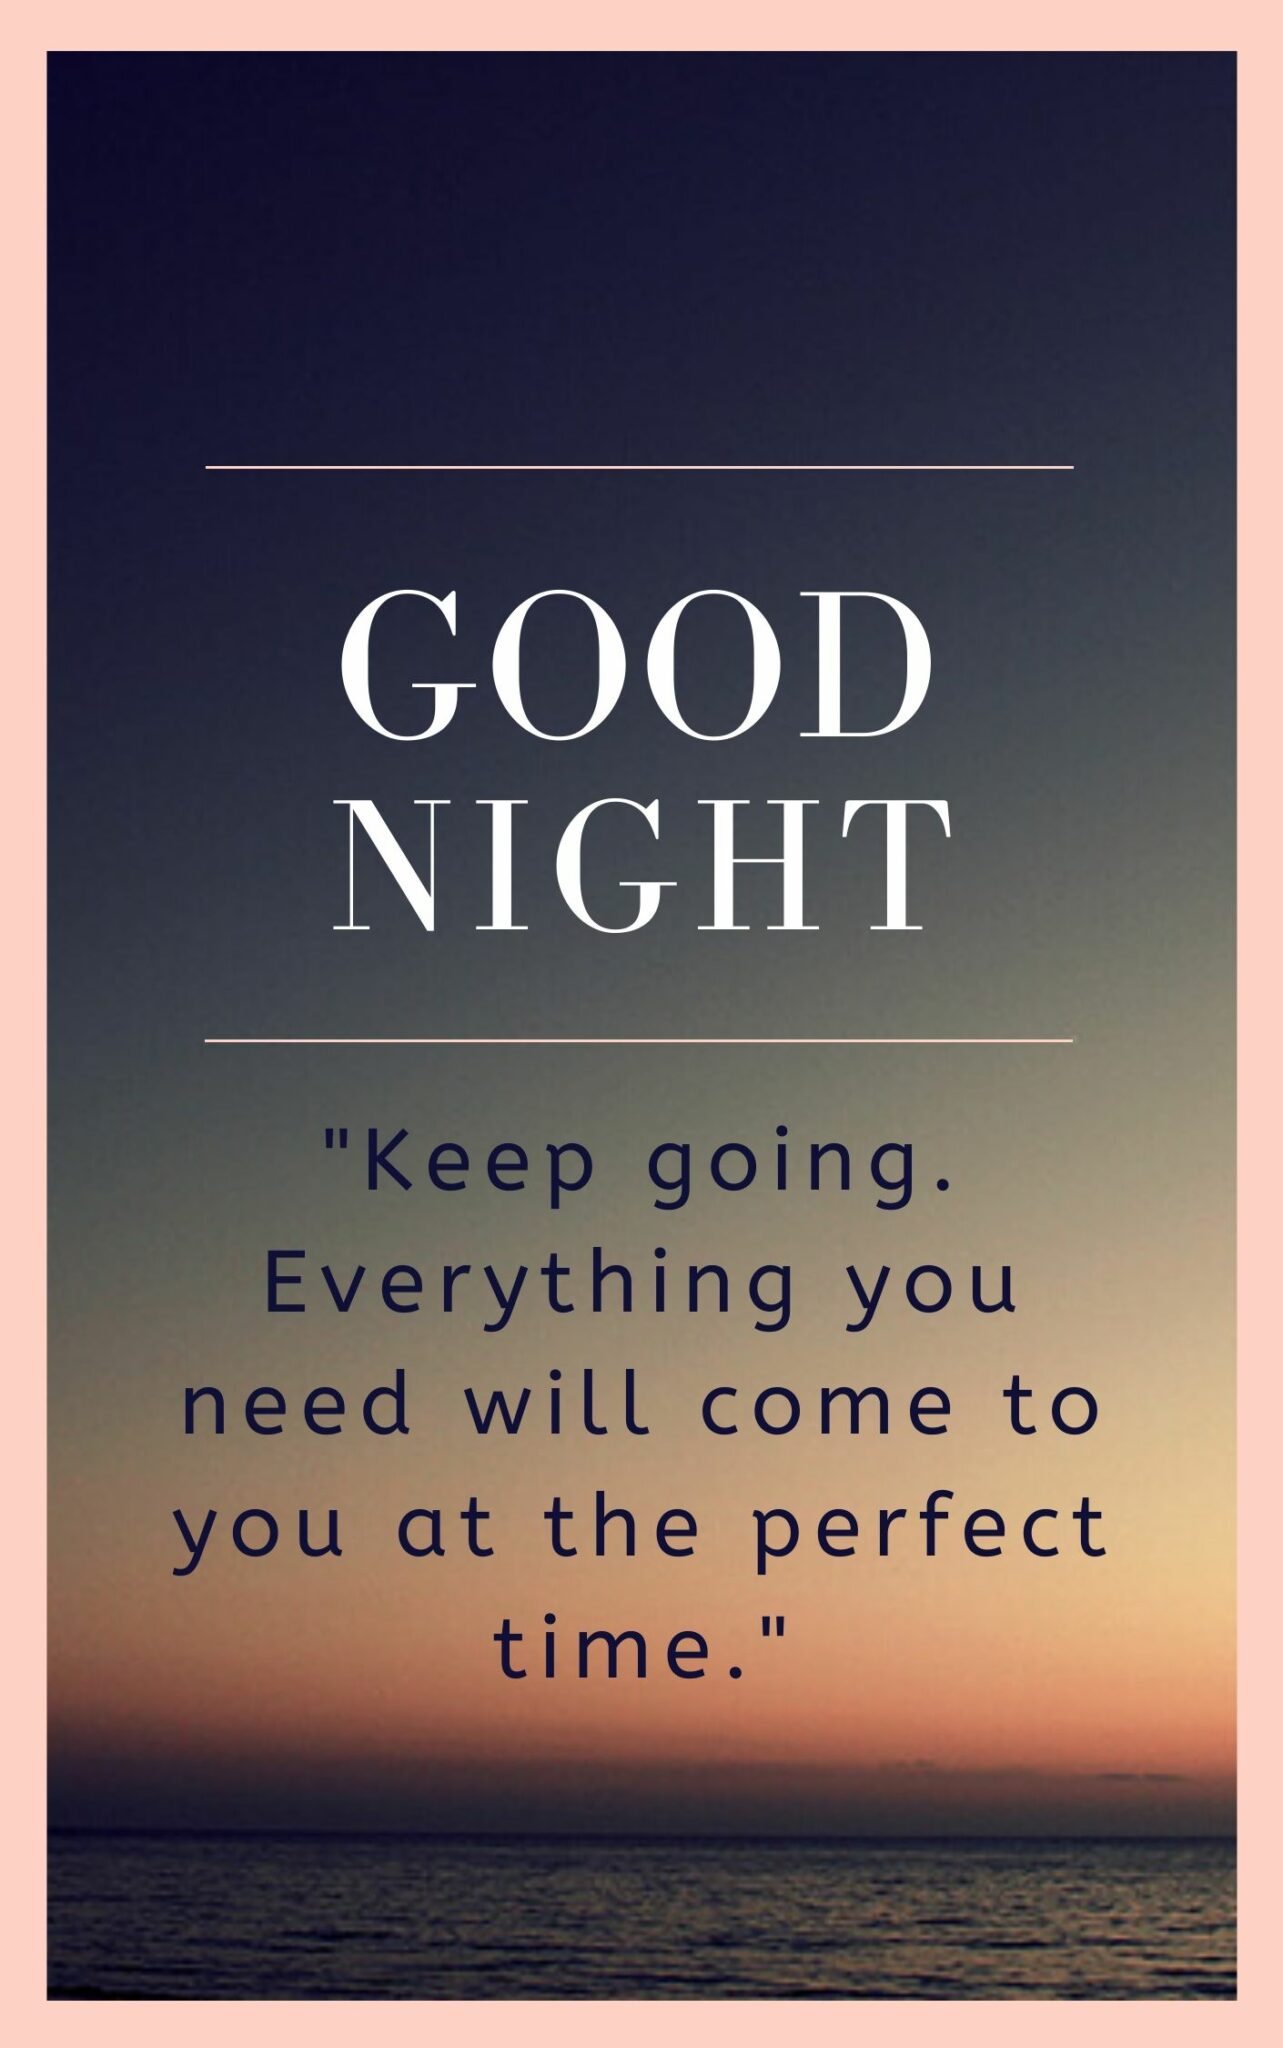 Good Night Quote Image Keep going. Everything you need will come to you at the perfect time.